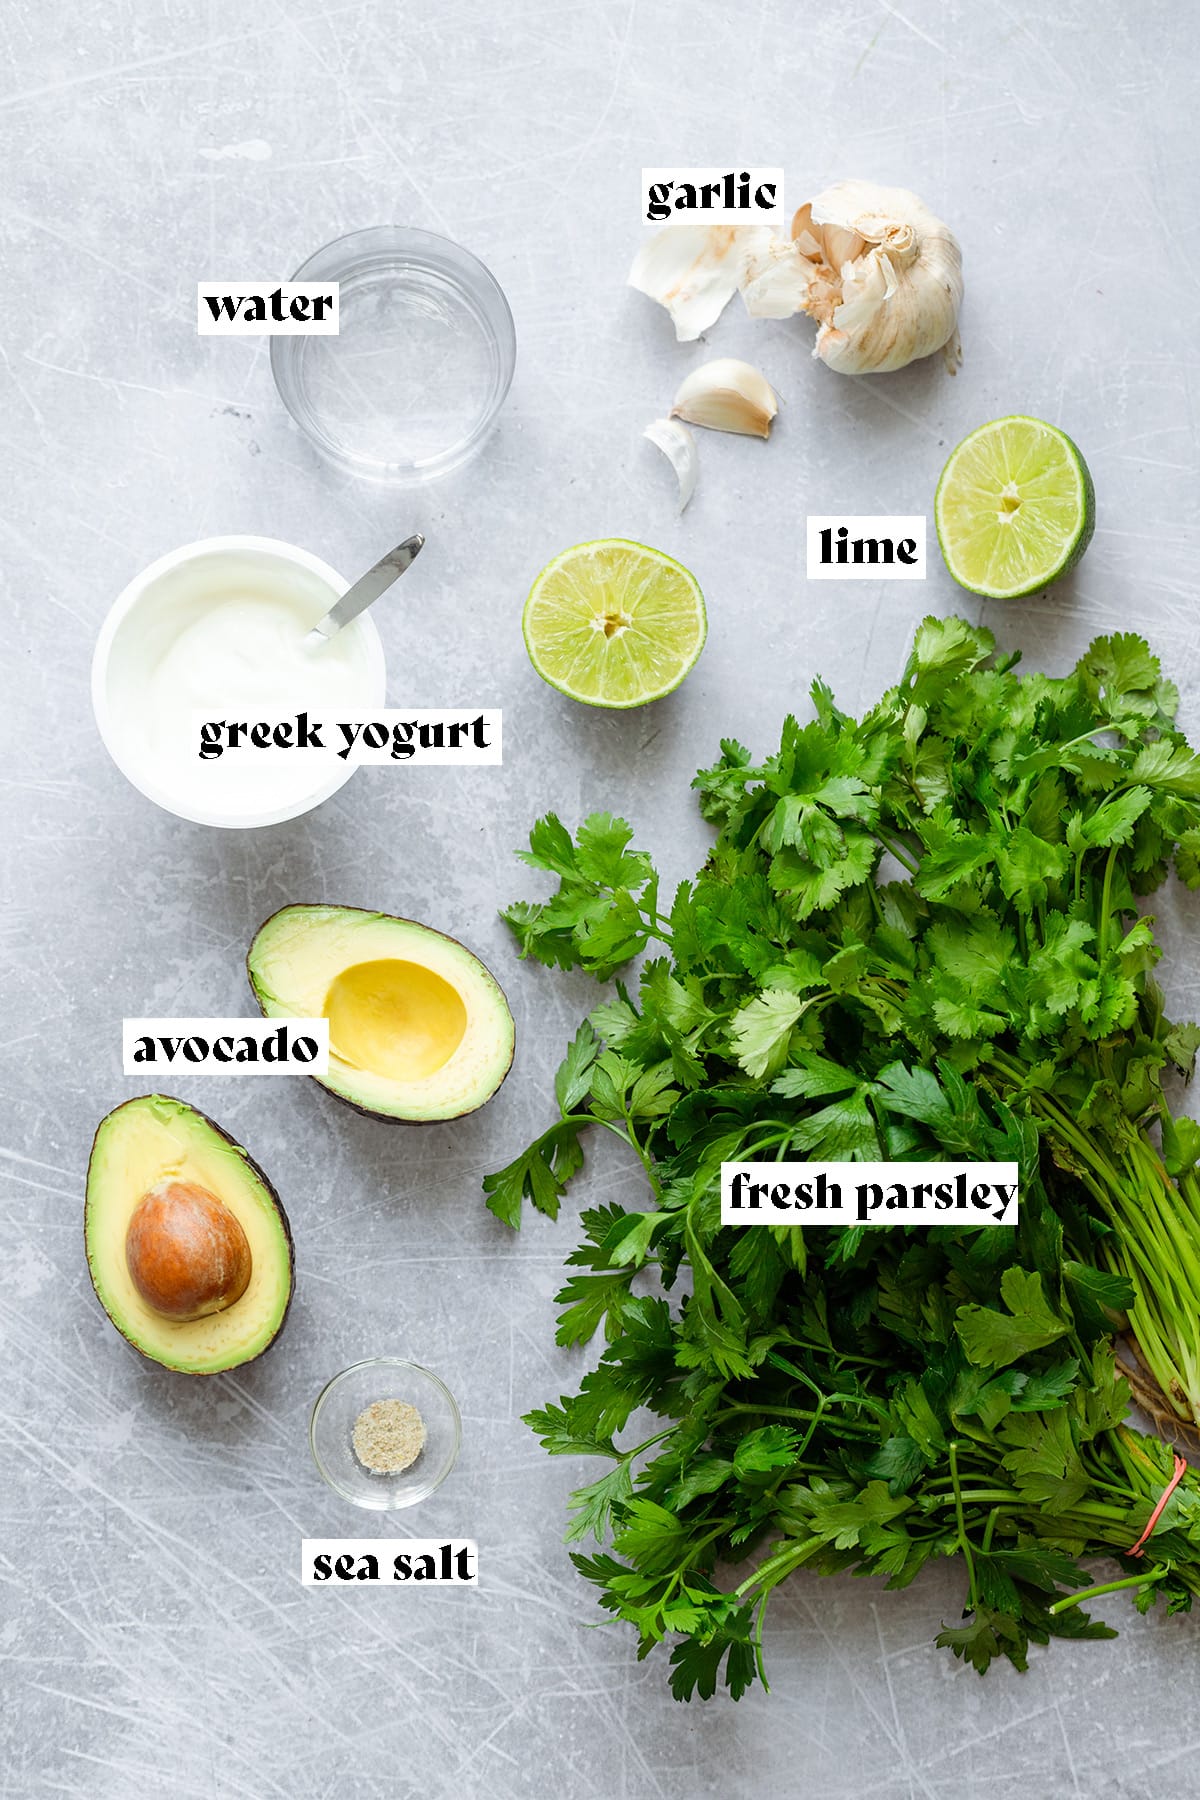 Parsley, avocado, lime, garlic, greek yogurt, and water laid out on a metal background.